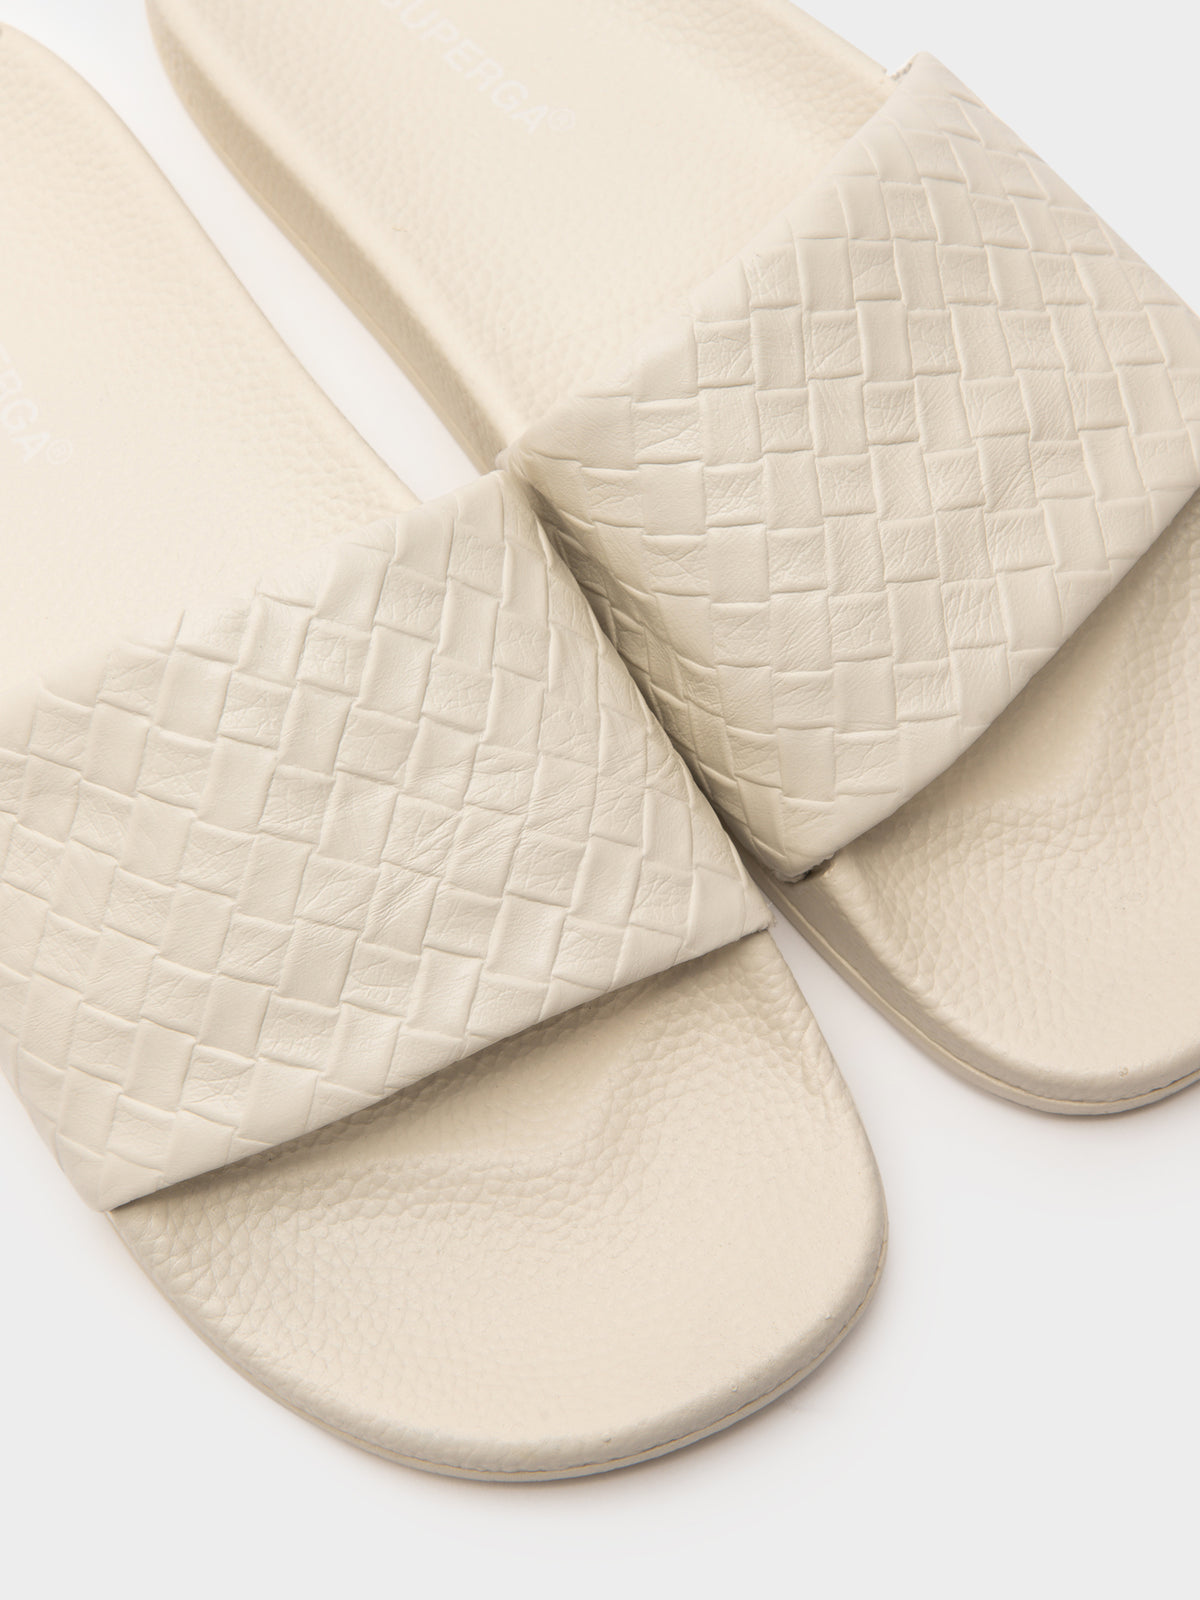 Womens 1908 Woven Leather Slides in Off White